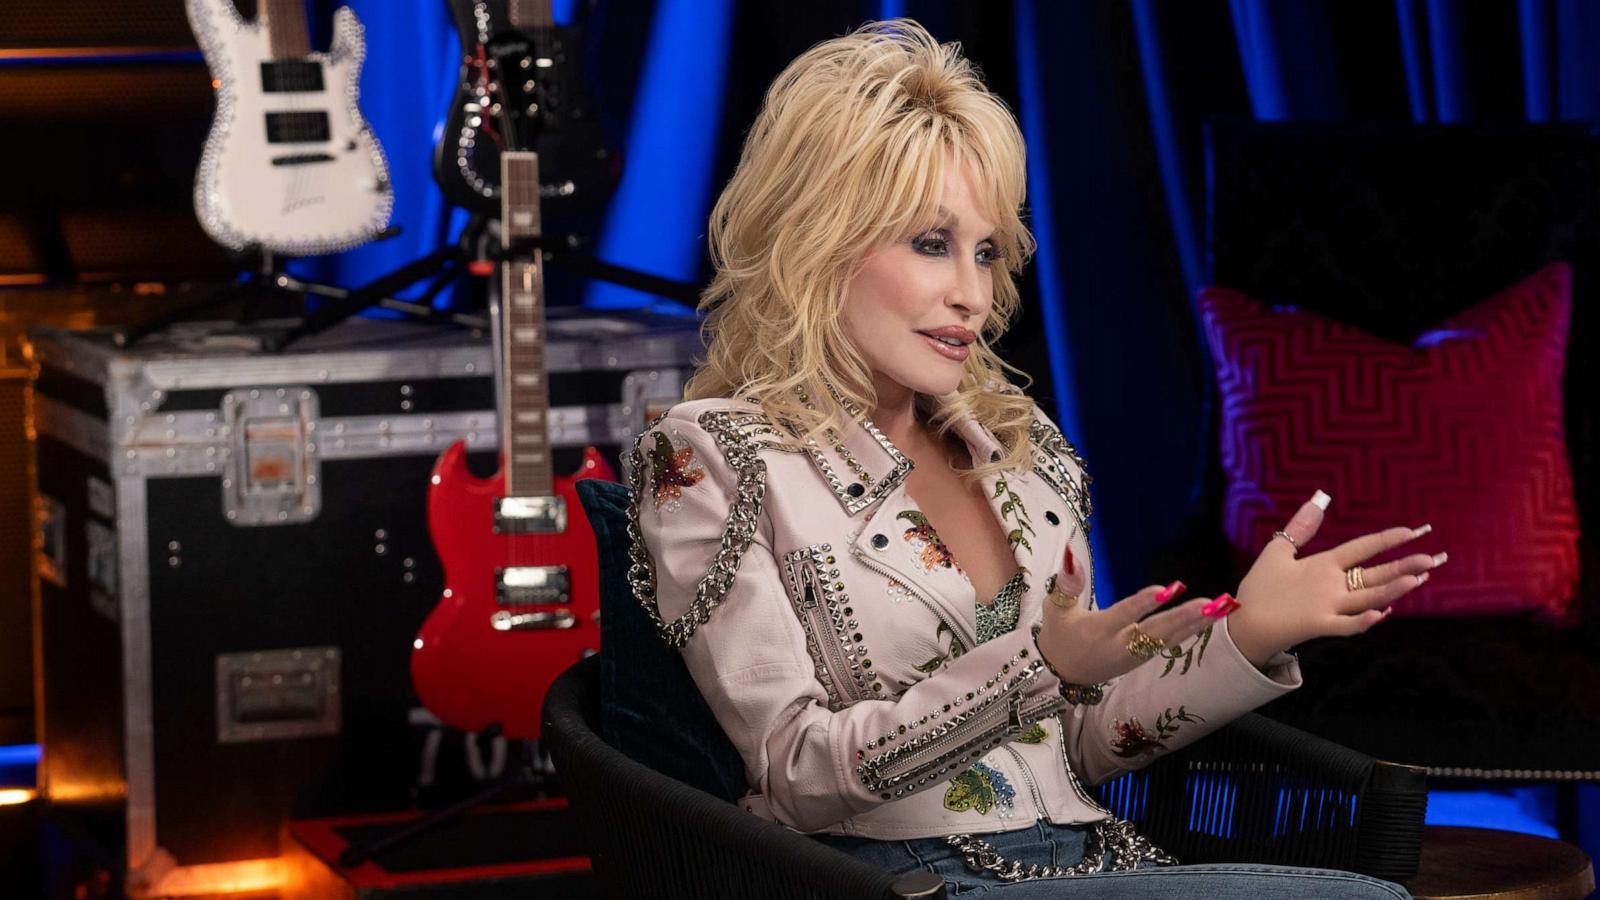 PHOTO: Dolly Parton appears in this image from her interview with Robin Roberts.